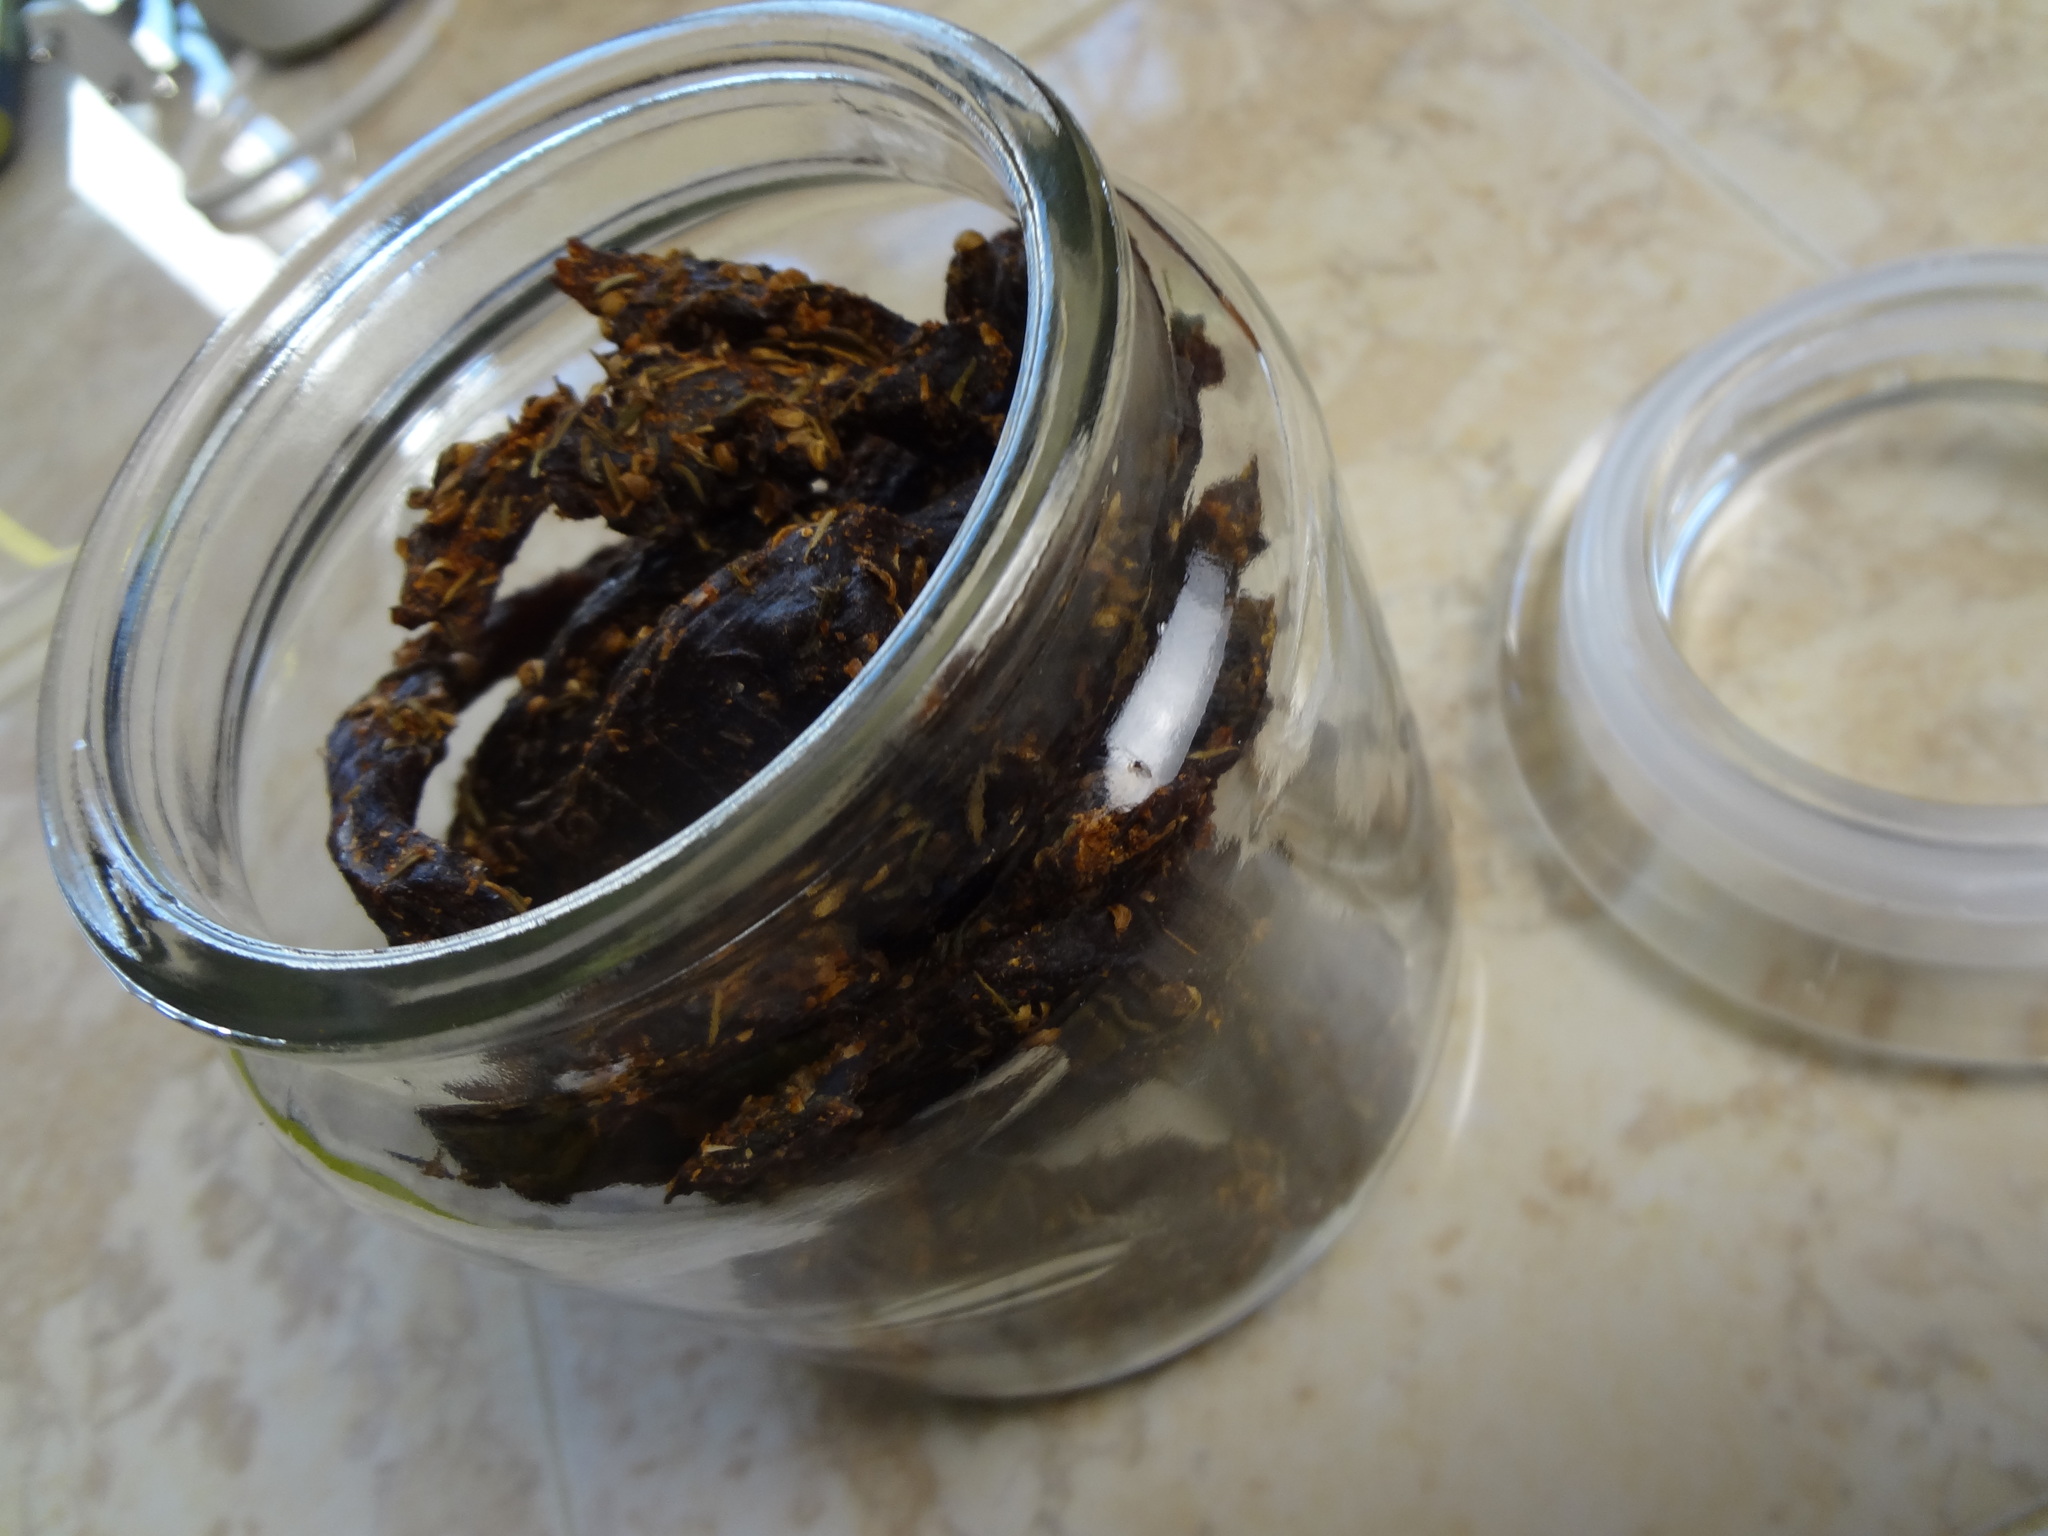 Beef jerky or meat chips - My, Jerky, Meat chips, Beer snack, Longpost, Video, Video recipe, Recipe, Cooking